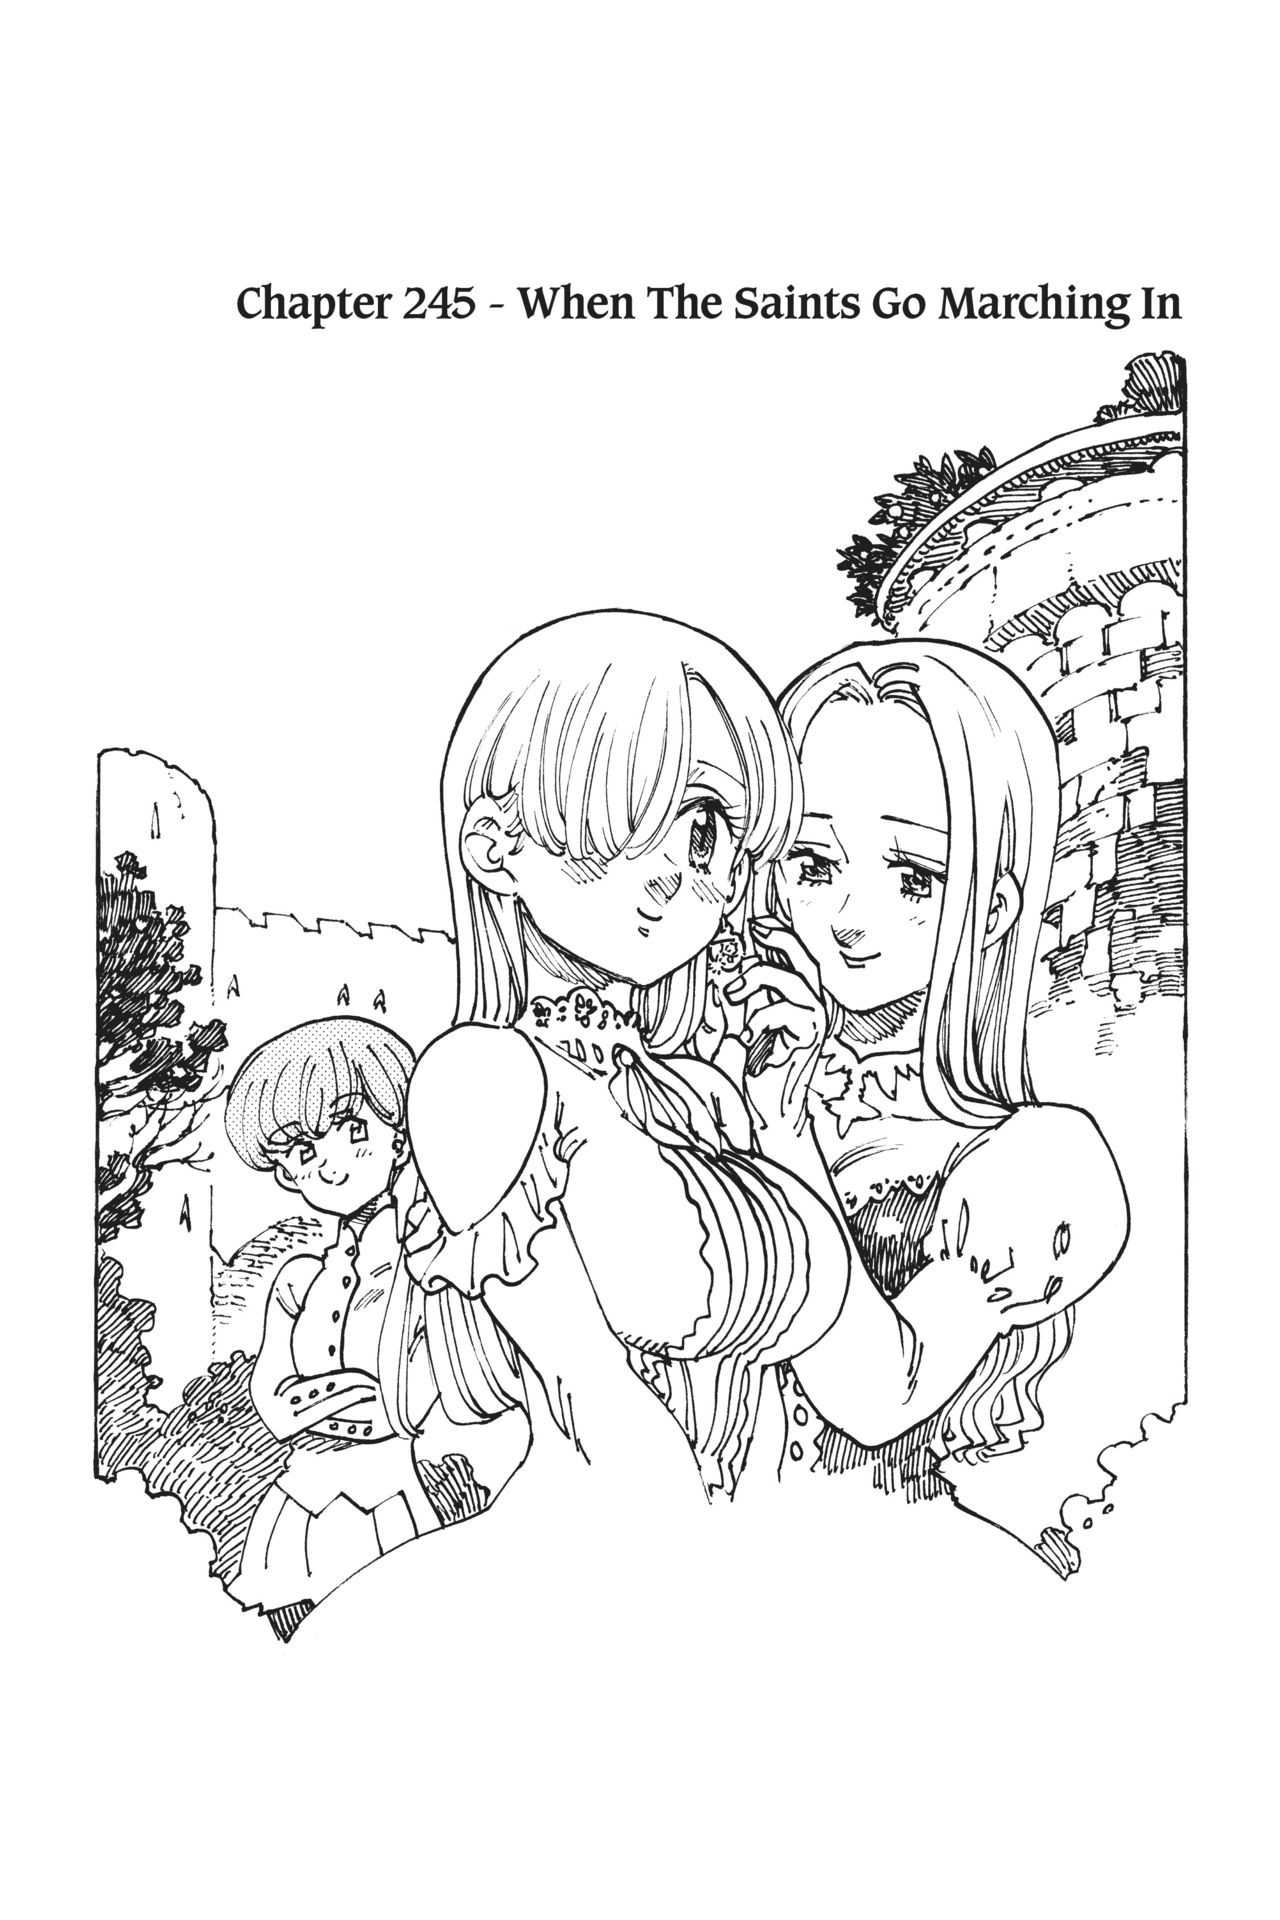 The Seven Deadly Sins (Covers & Chapter Title Cards) 170